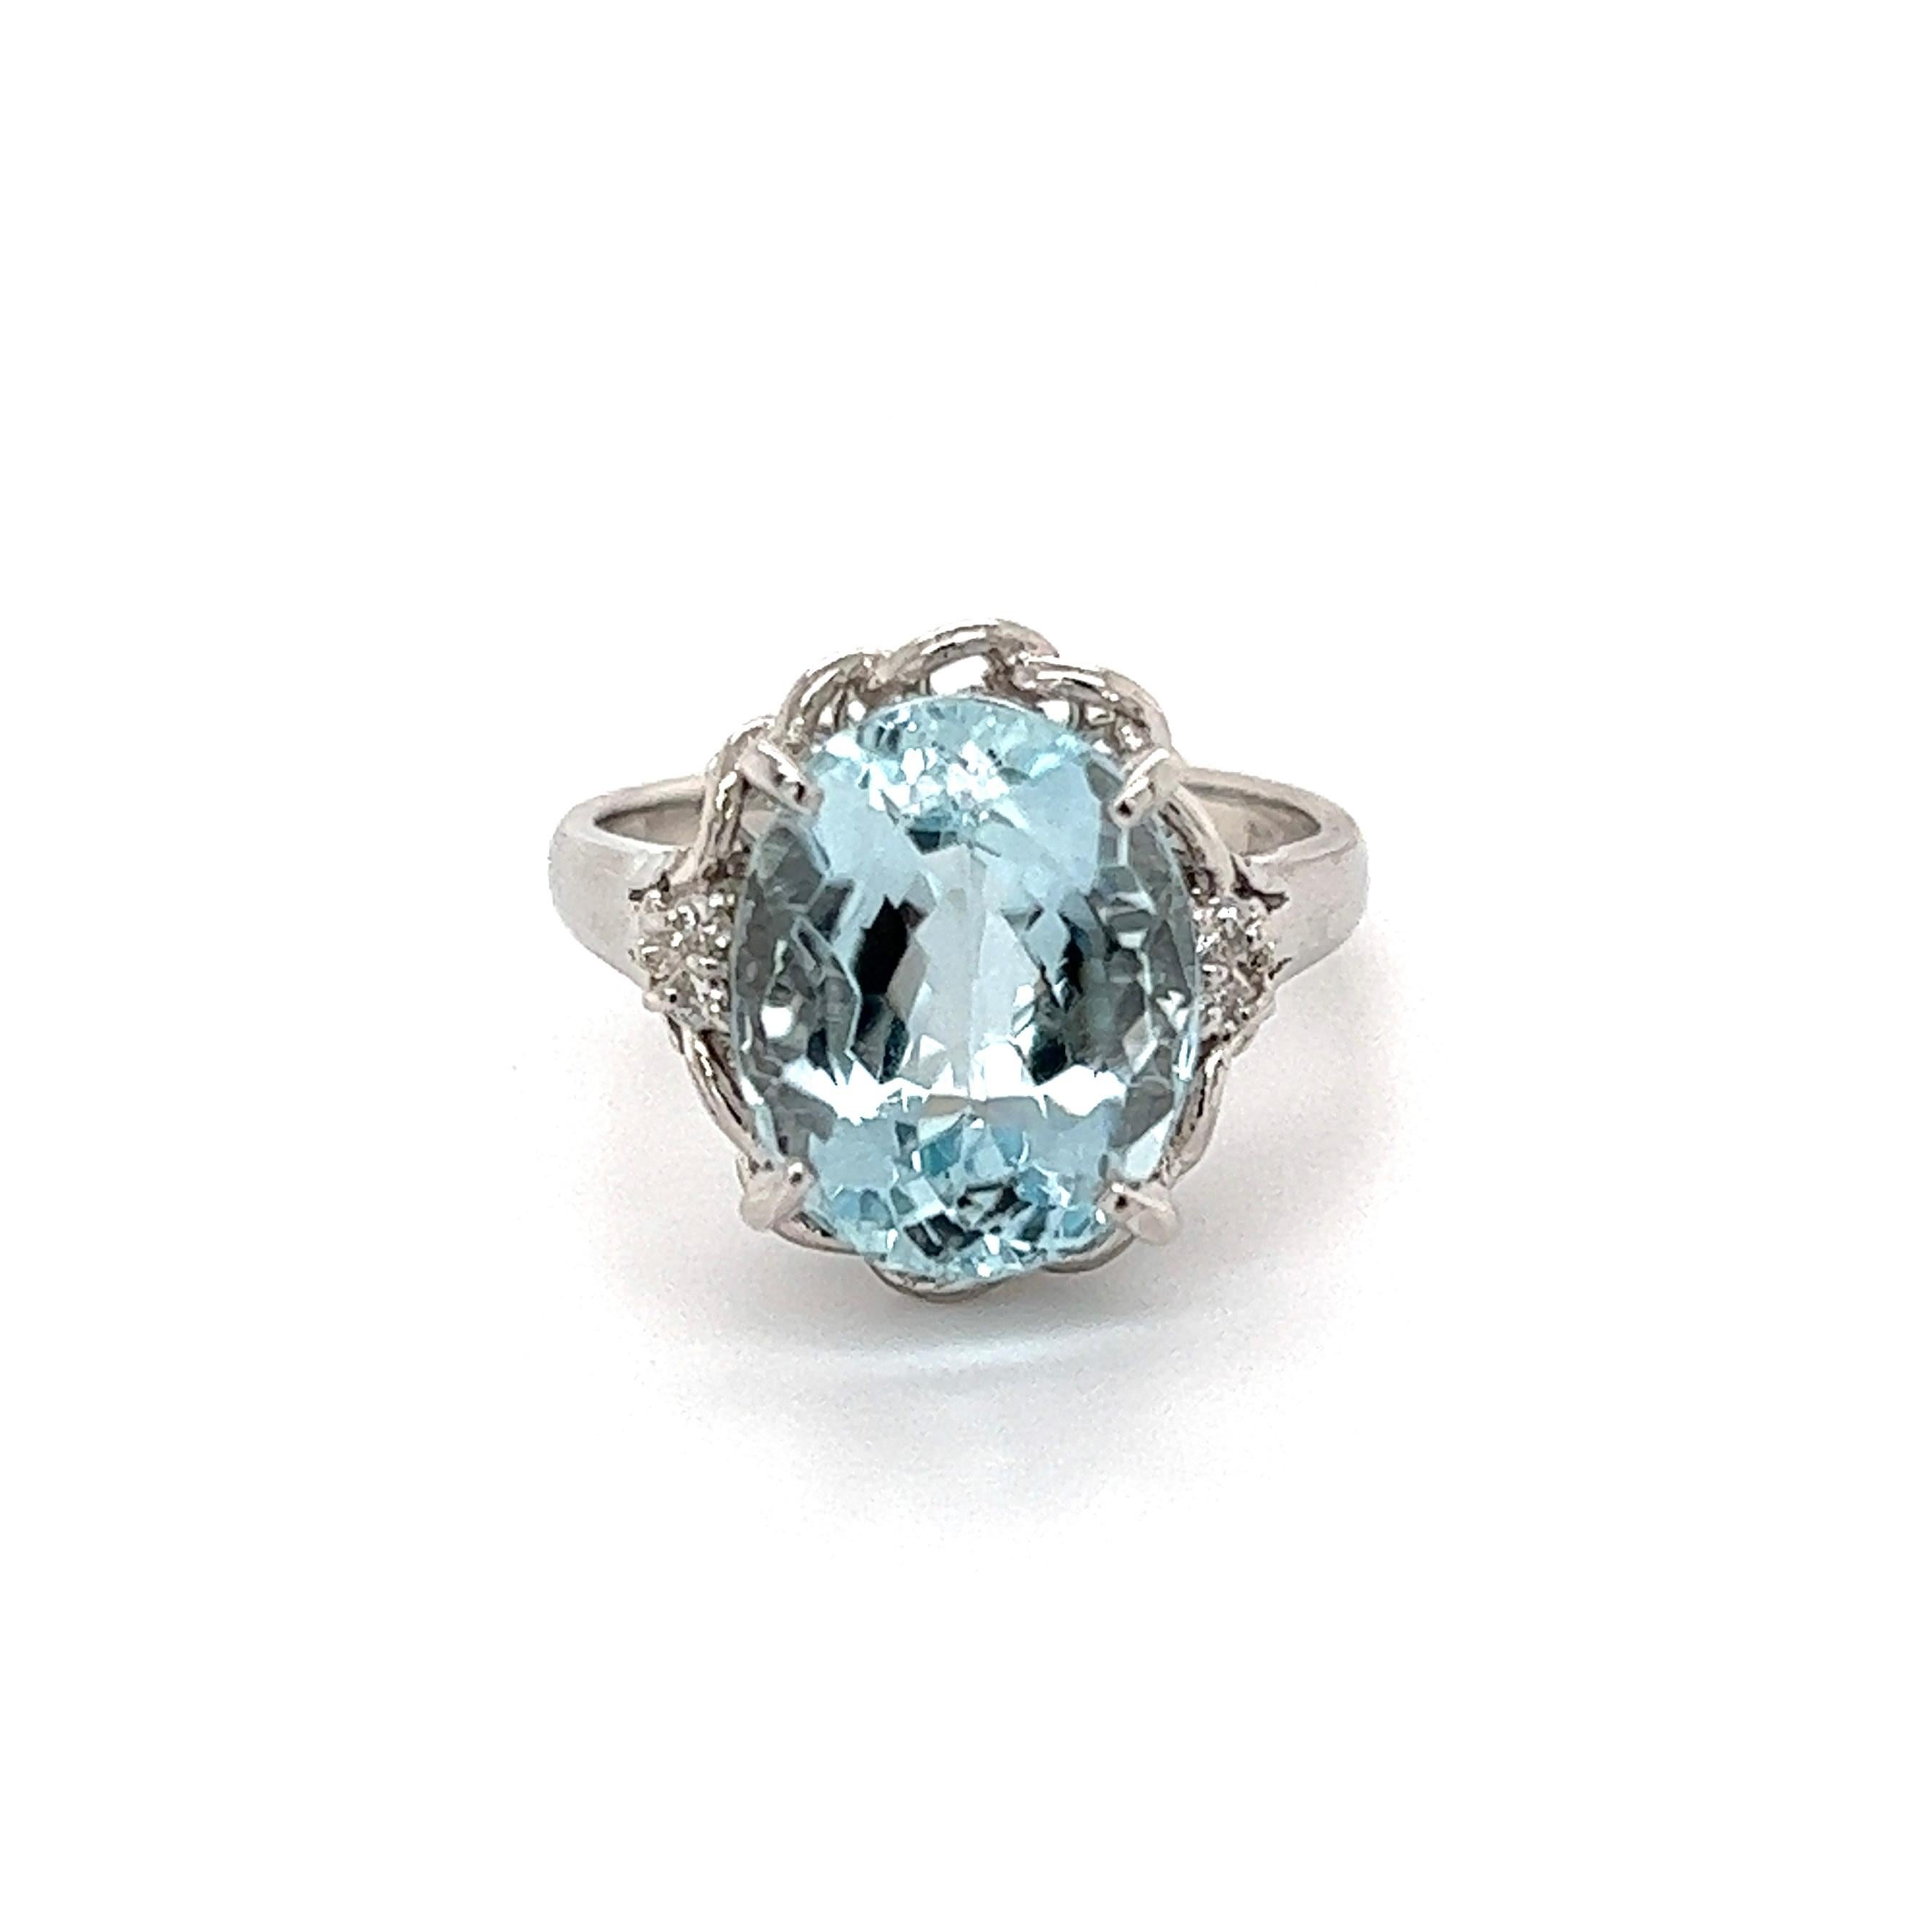 Simply Beautiful! Aquamarine and Diamond Cocktail Ring. Centering a securely nestled Hand set 5.88 Carat Oval Aquamarine with Diamonds on either side, weighing approx. 0.04tcw. Hand crafted Platinum mounting. Dimensions: 1.04: l x 0.75” w x 0.58” h